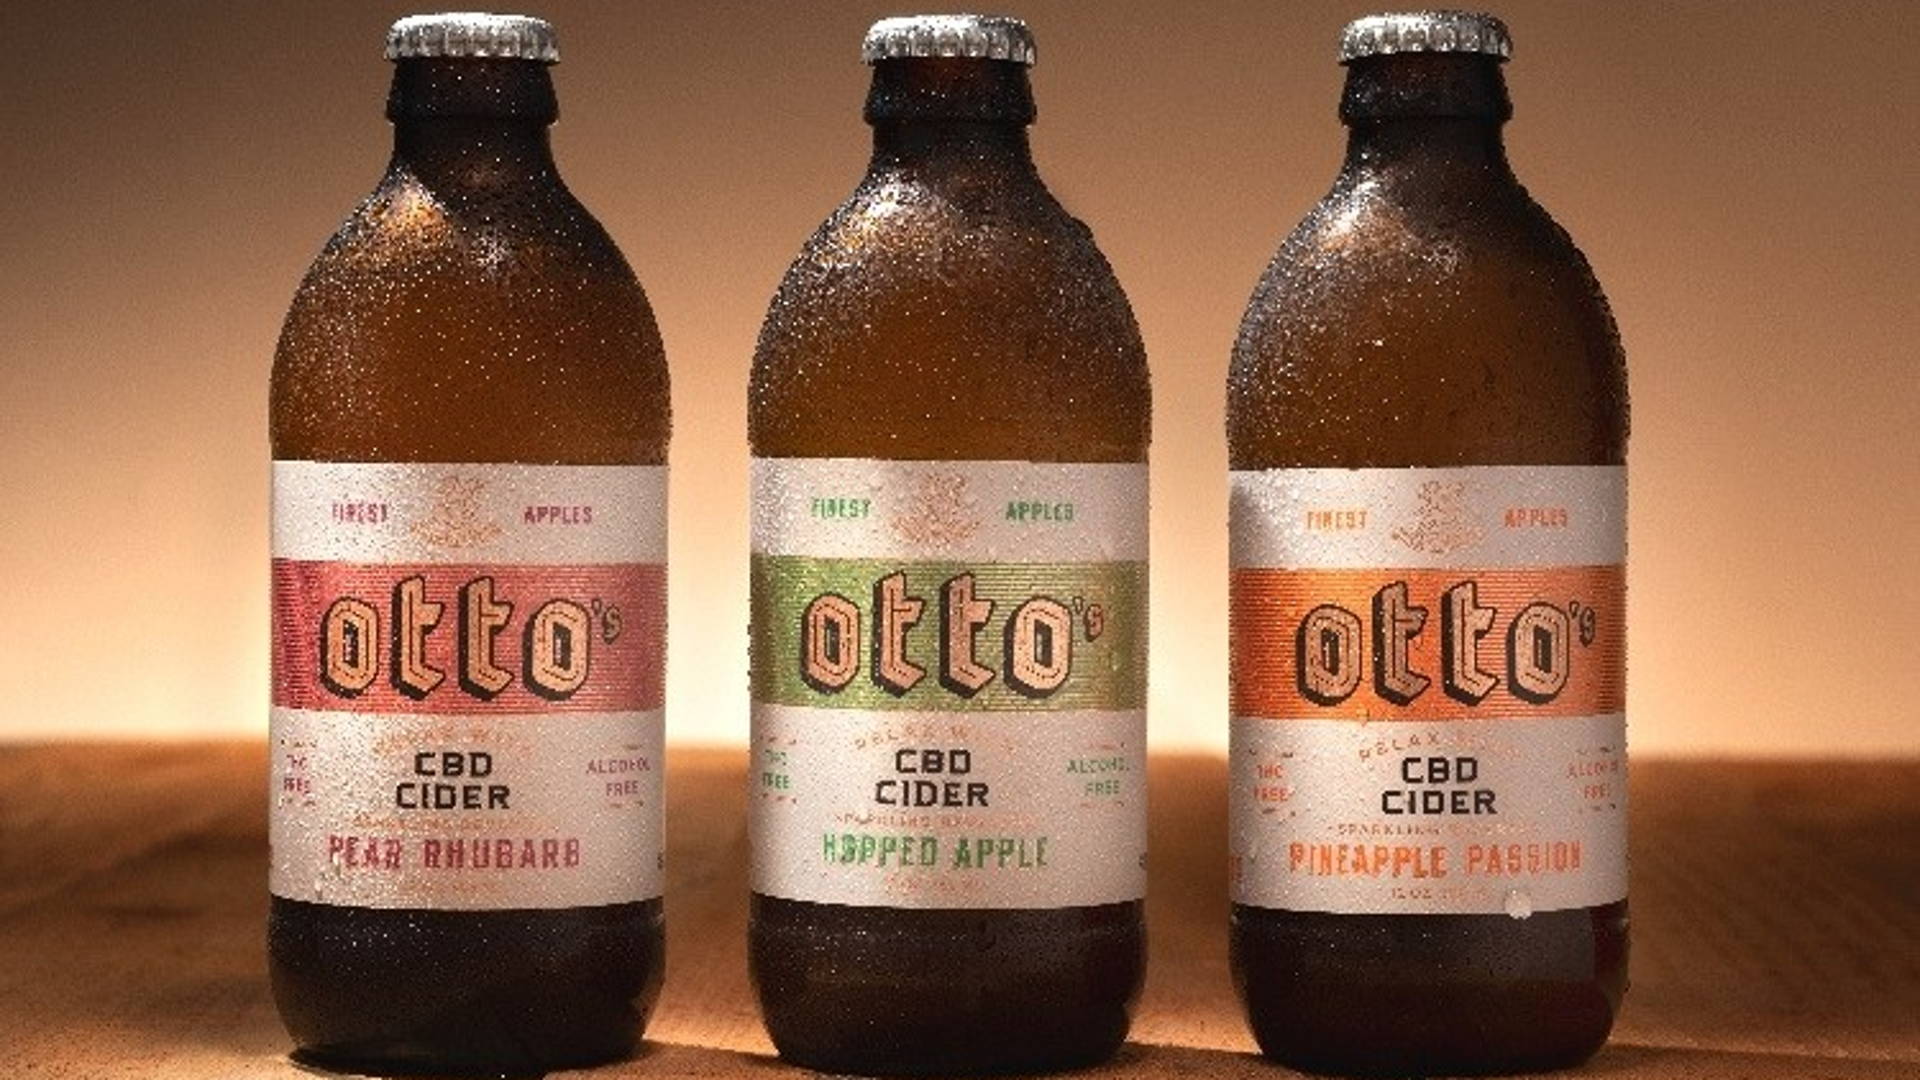 Featured image for Otto’s CBD Cider’s Label Mix Of Typography Used To Represent A Classic With A Twist